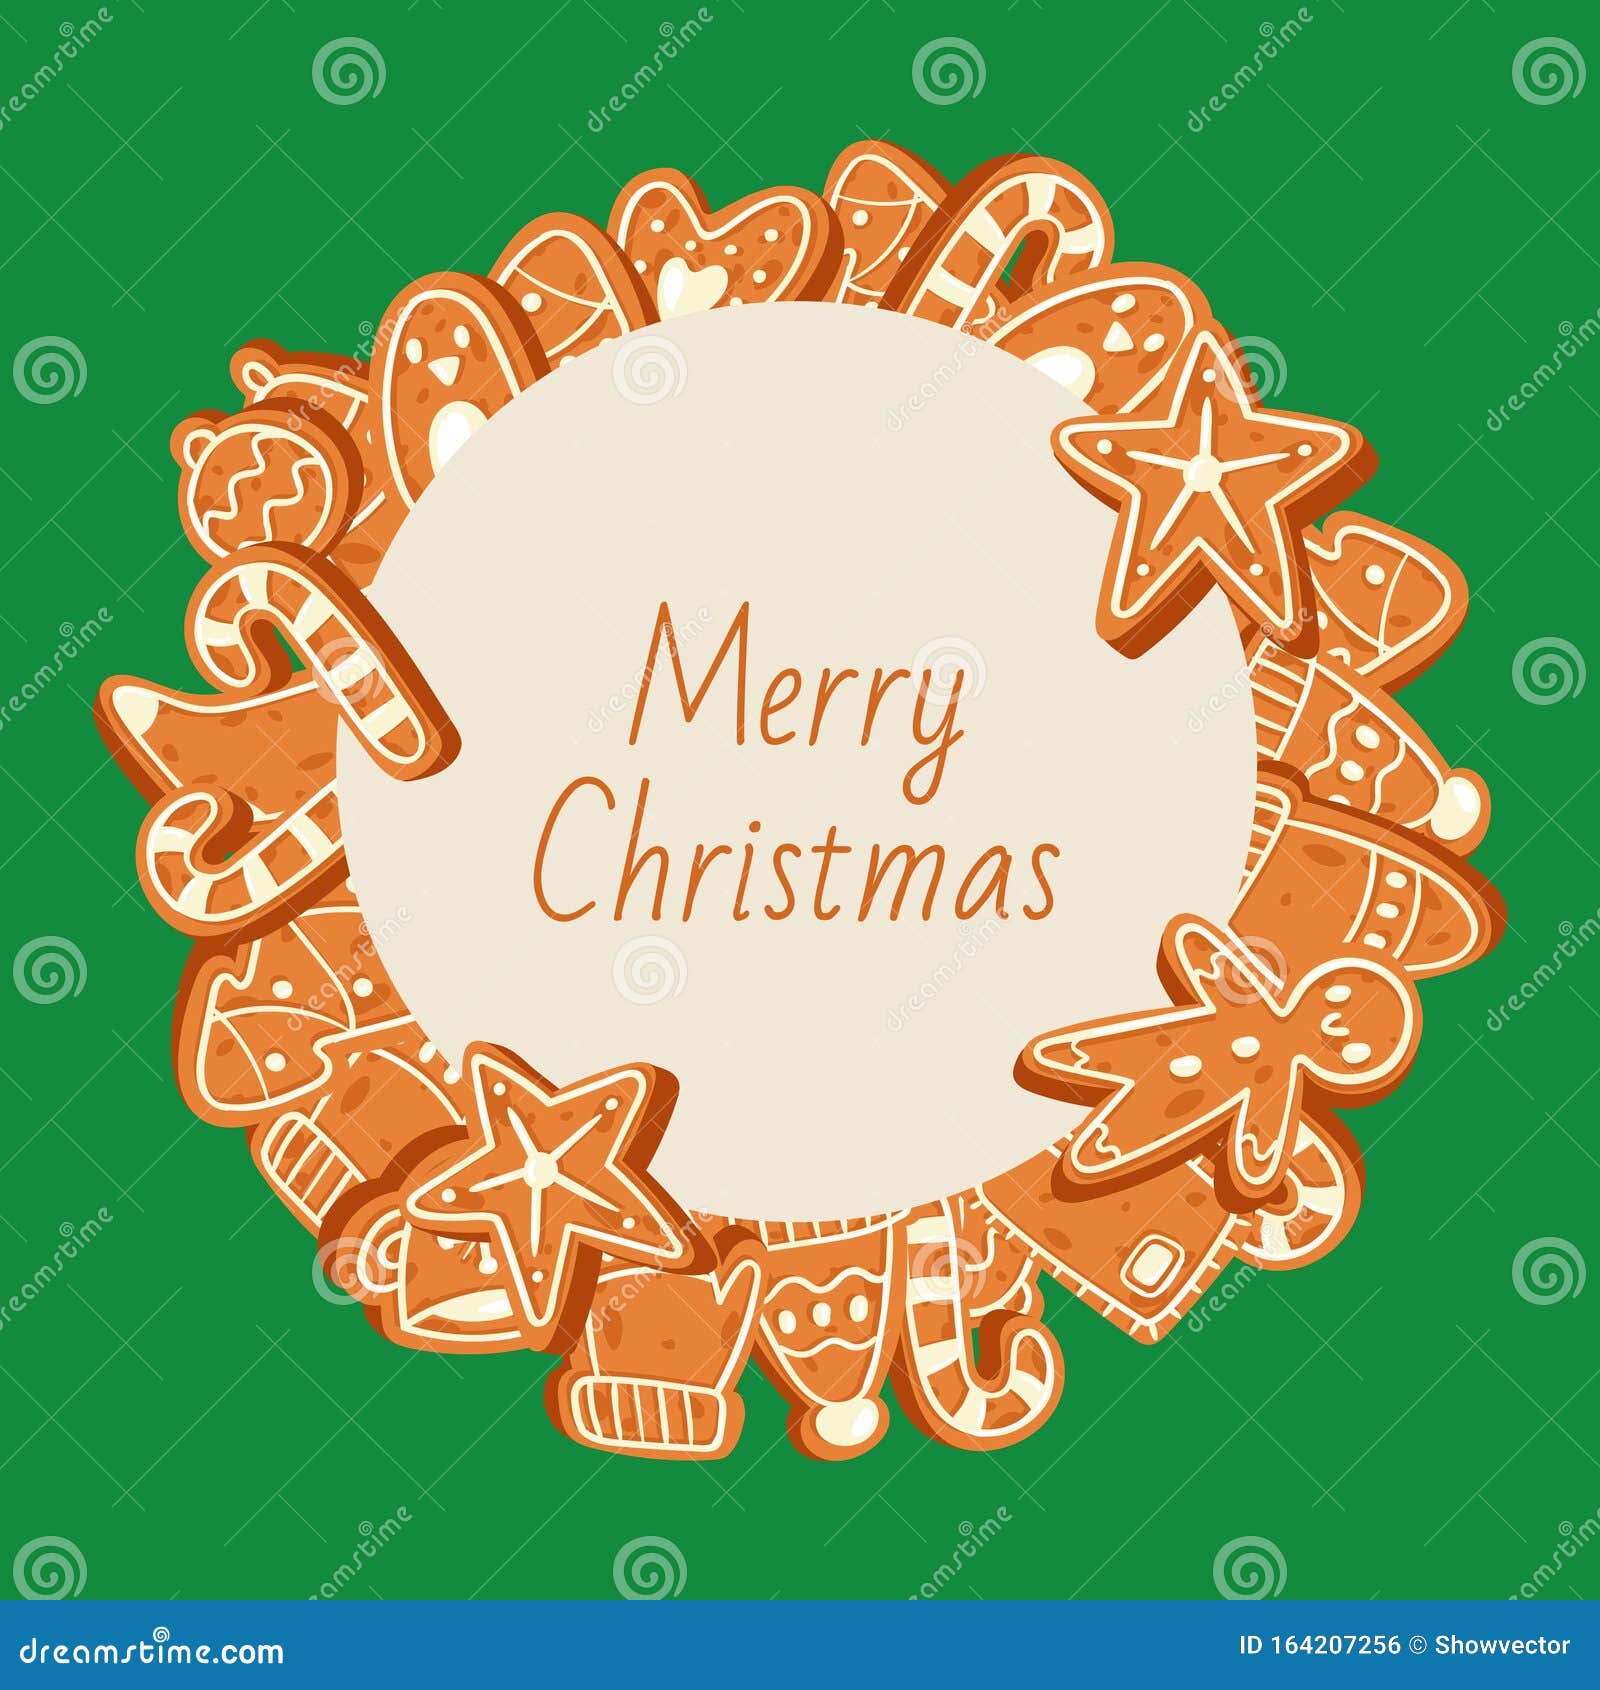 Christmas Banner Made of Gingerbread Cookies Vector Illustration ...